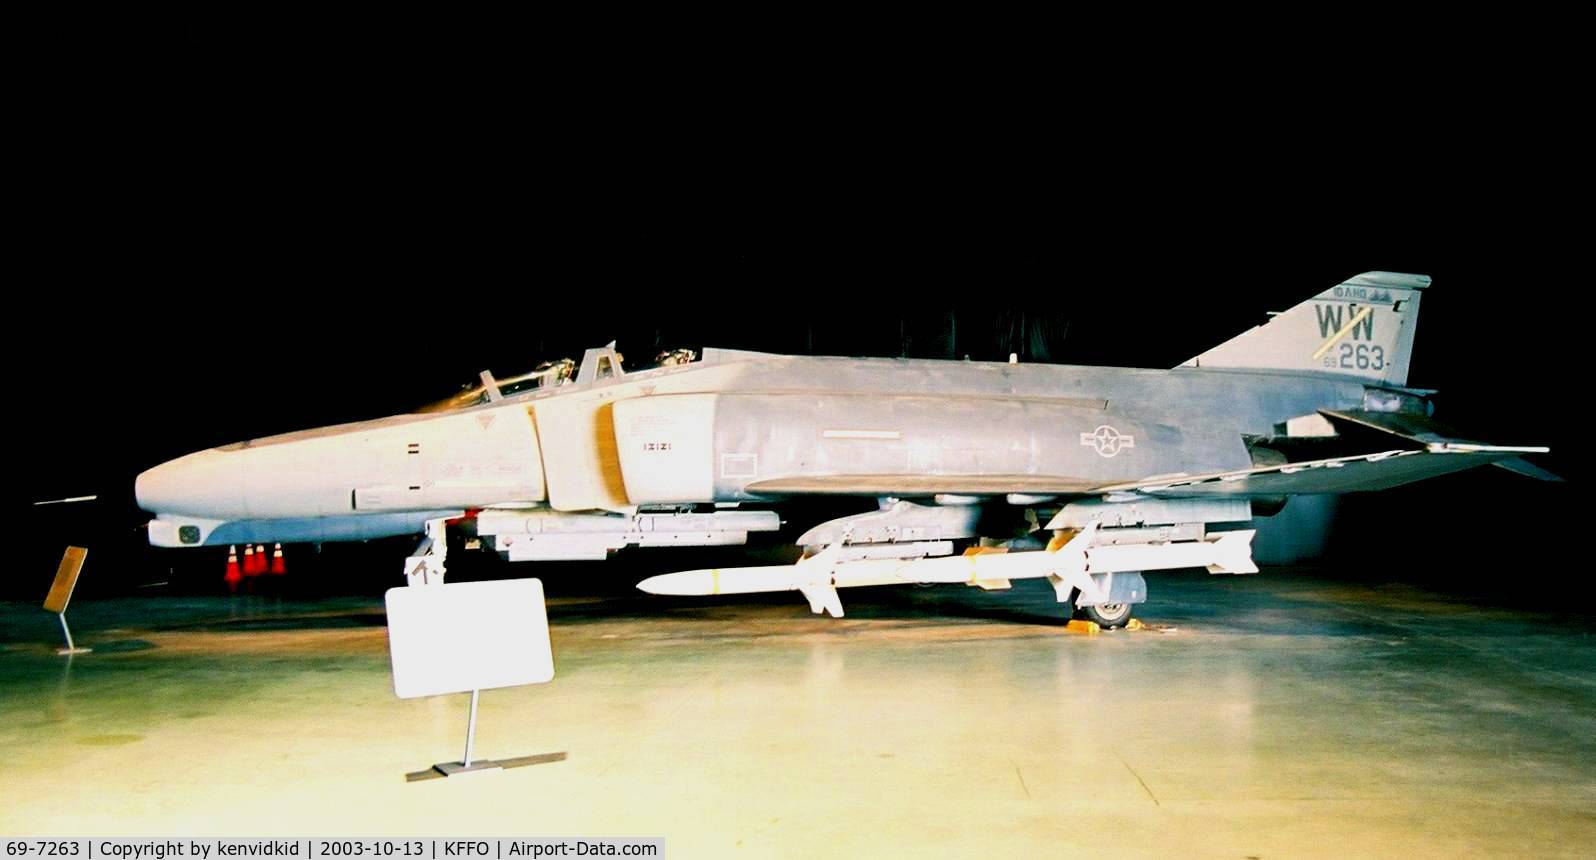 69-7263, 1969 McDonnell Douglas F-4G Phantom II C/N 3947, At The Museum of the United States Air Force Dayton Ohio.